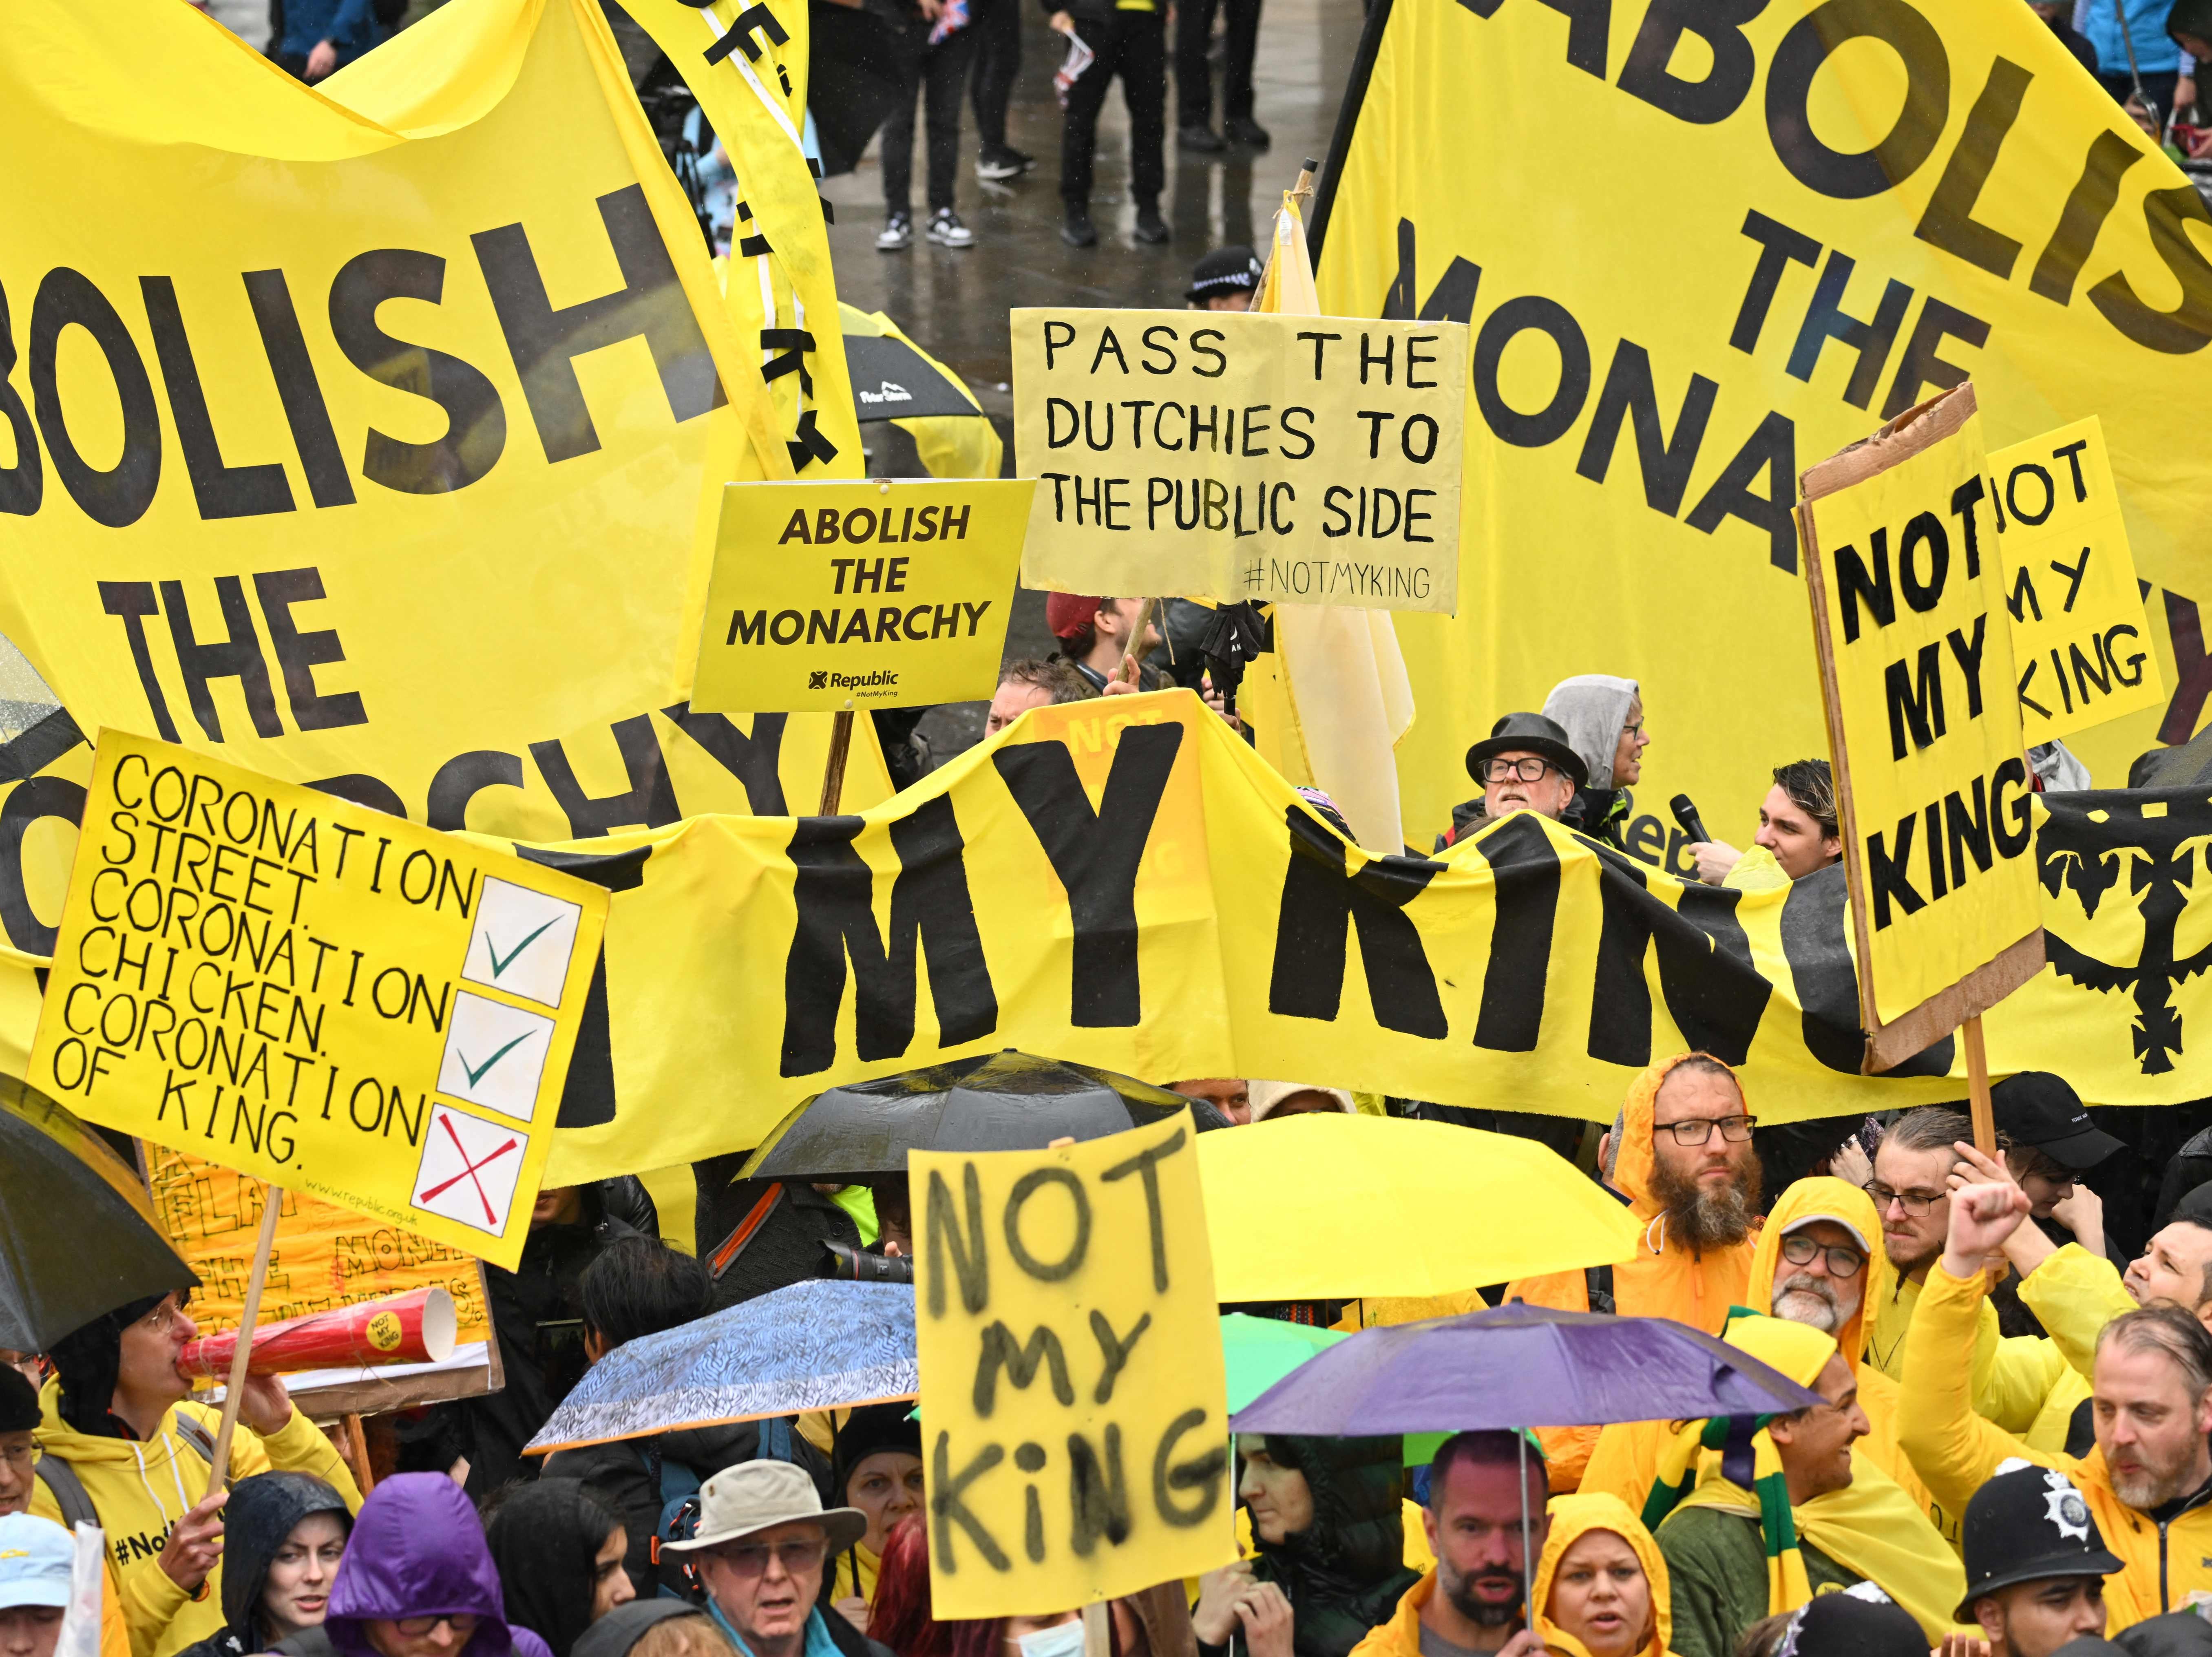 Protesters wave “Not My King” signs near Trafalgar Square ahead of the coronation of King Charles III